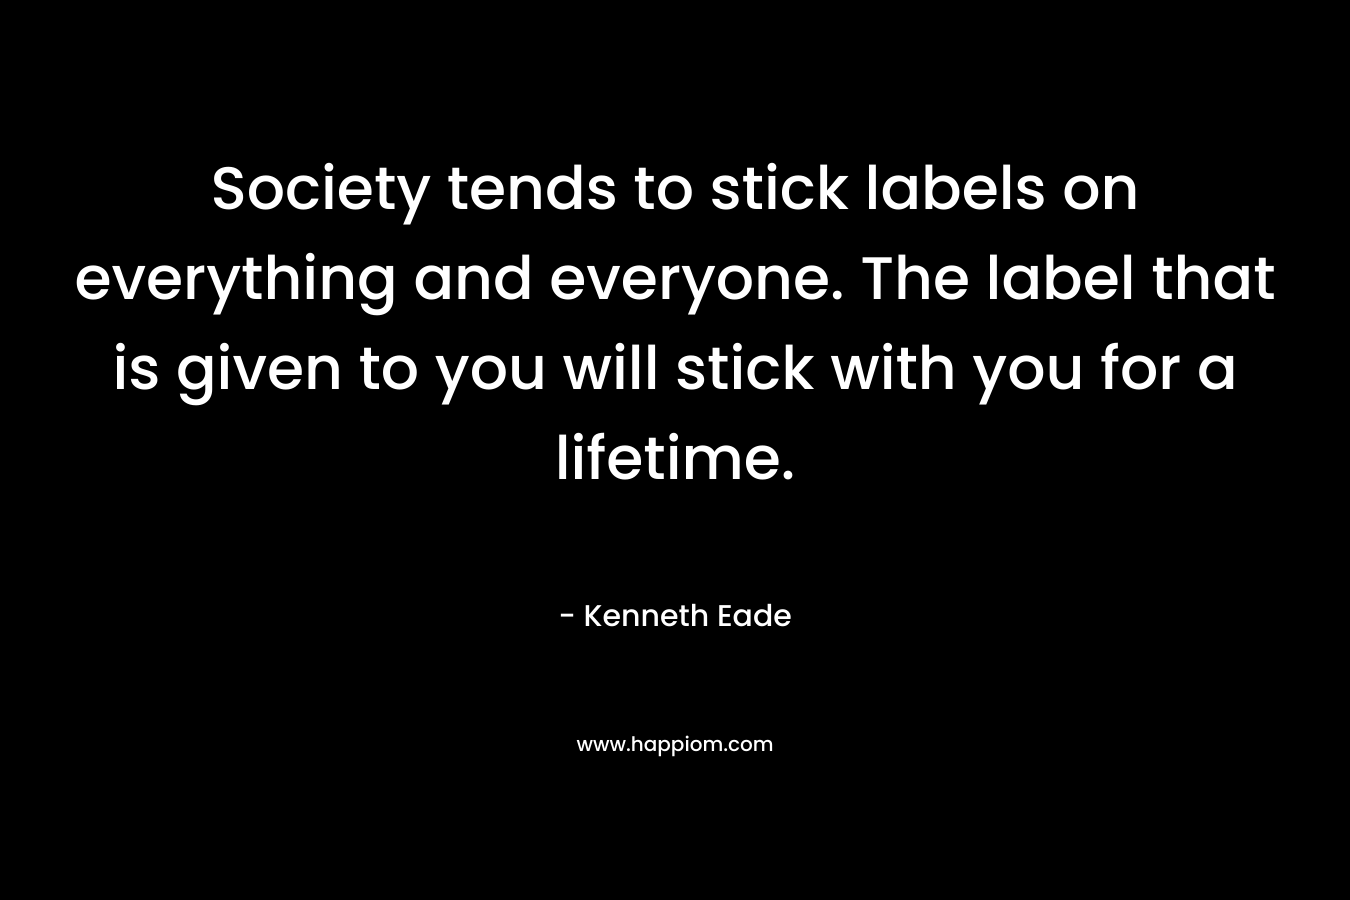 Society tends to stick labels on everything and everyone. The label that is given to you will stick with you for a lifetime. – Kenneth Eade